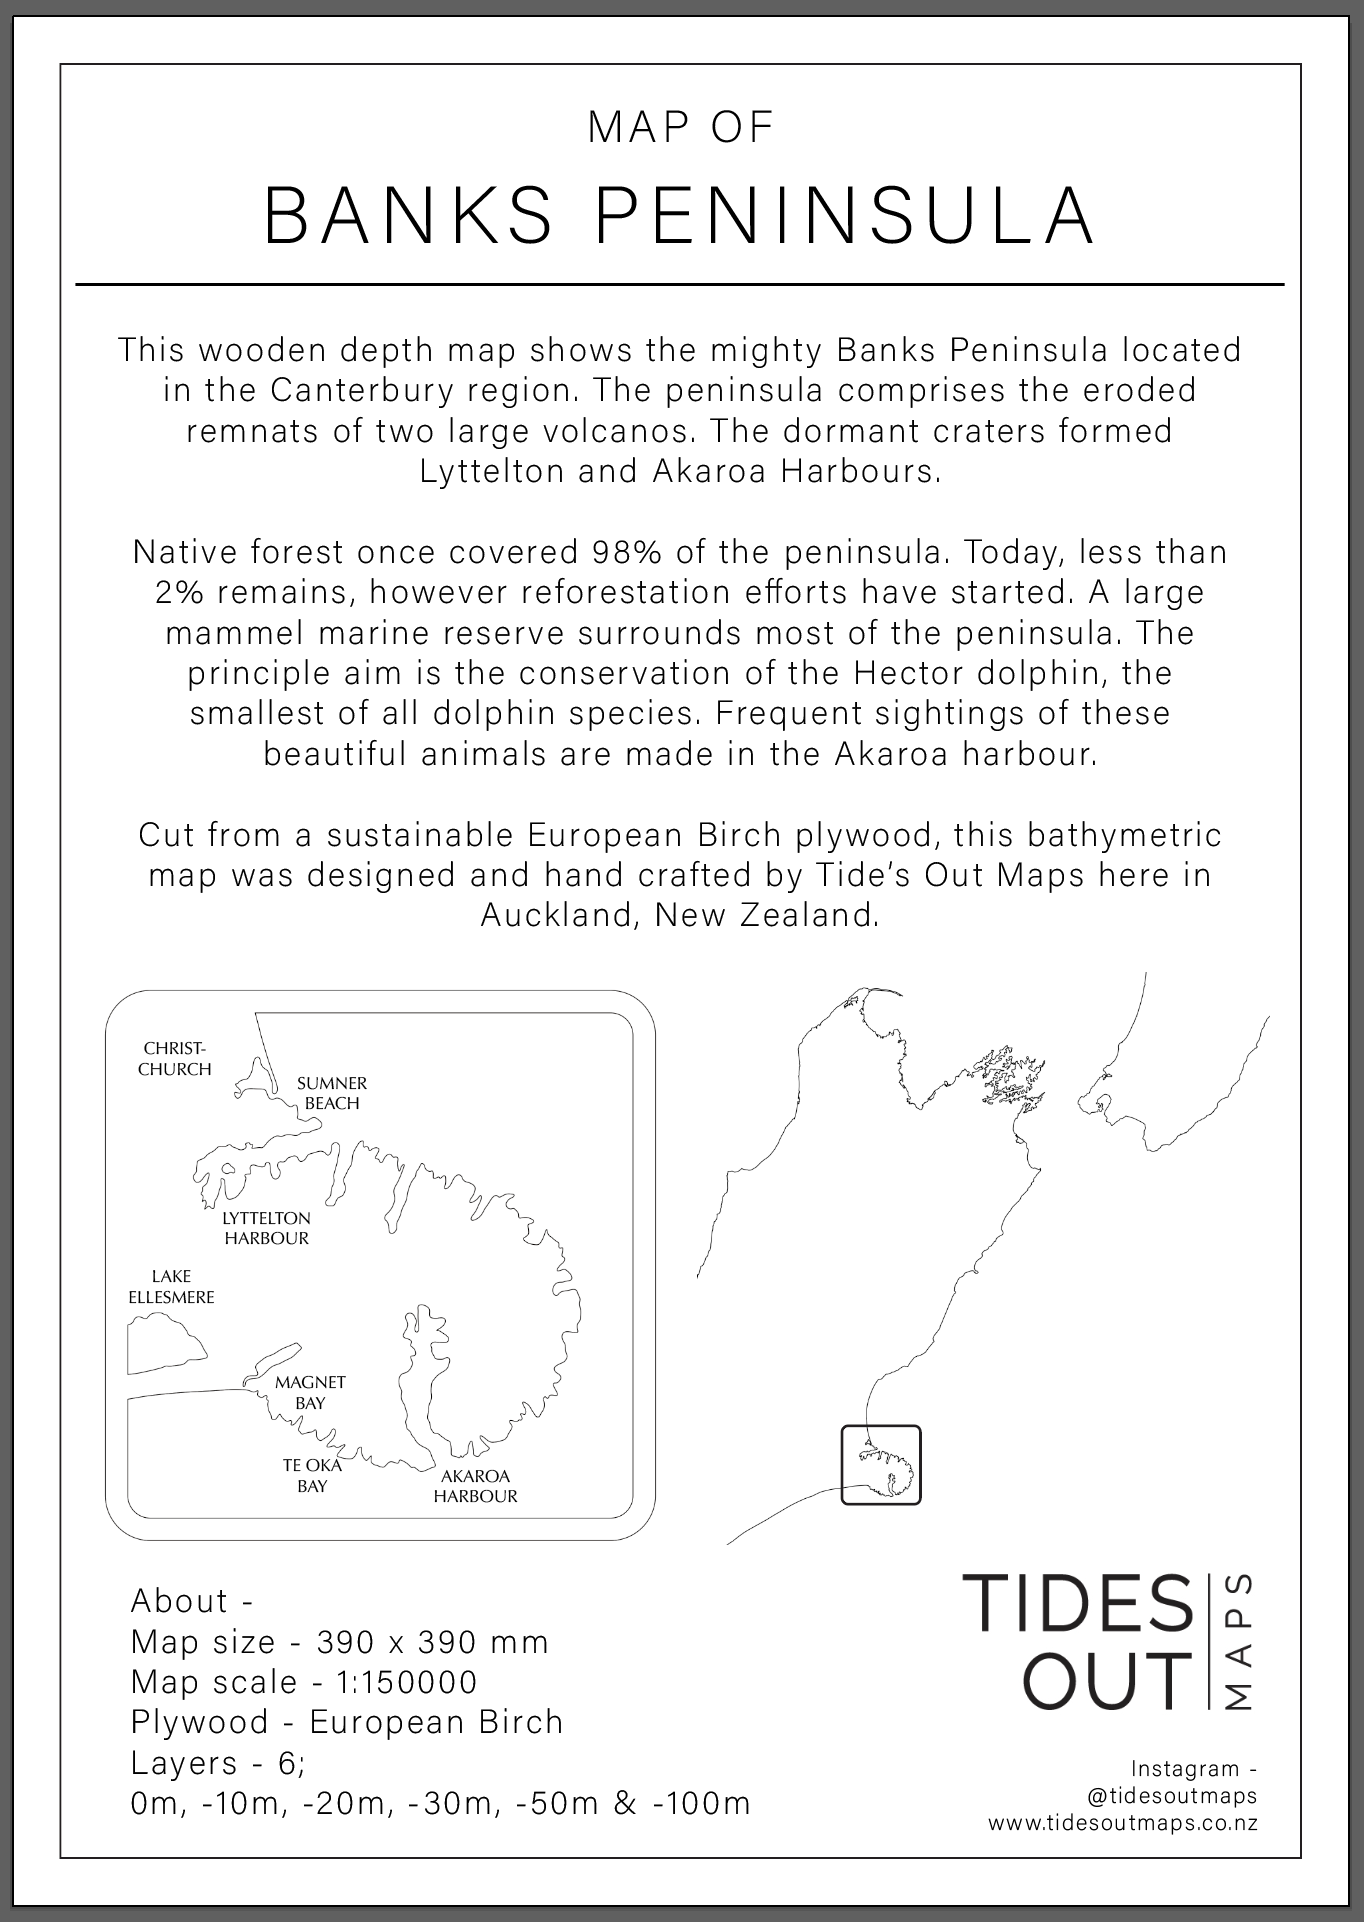 Banks Peninsula - Tide's Out Maps